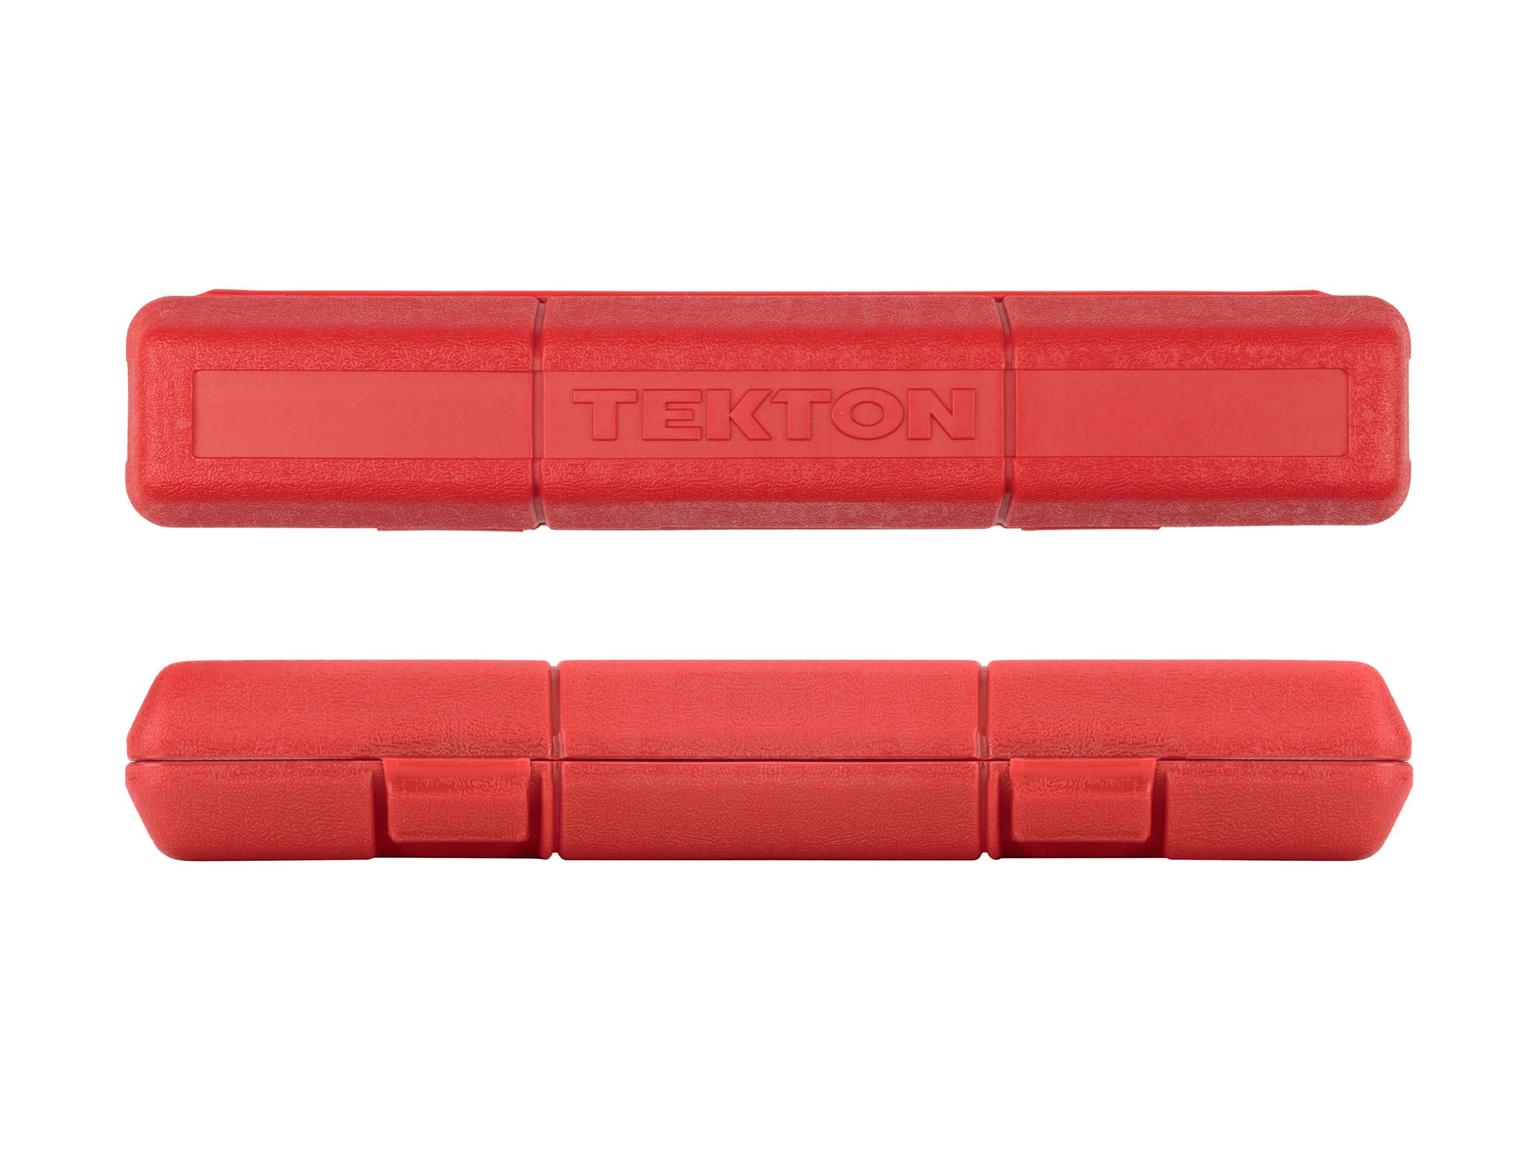 TEKTON 24330-D 3/8 Inch Drive Micrometer Torque Wrench (10-80 ft.-lb.)